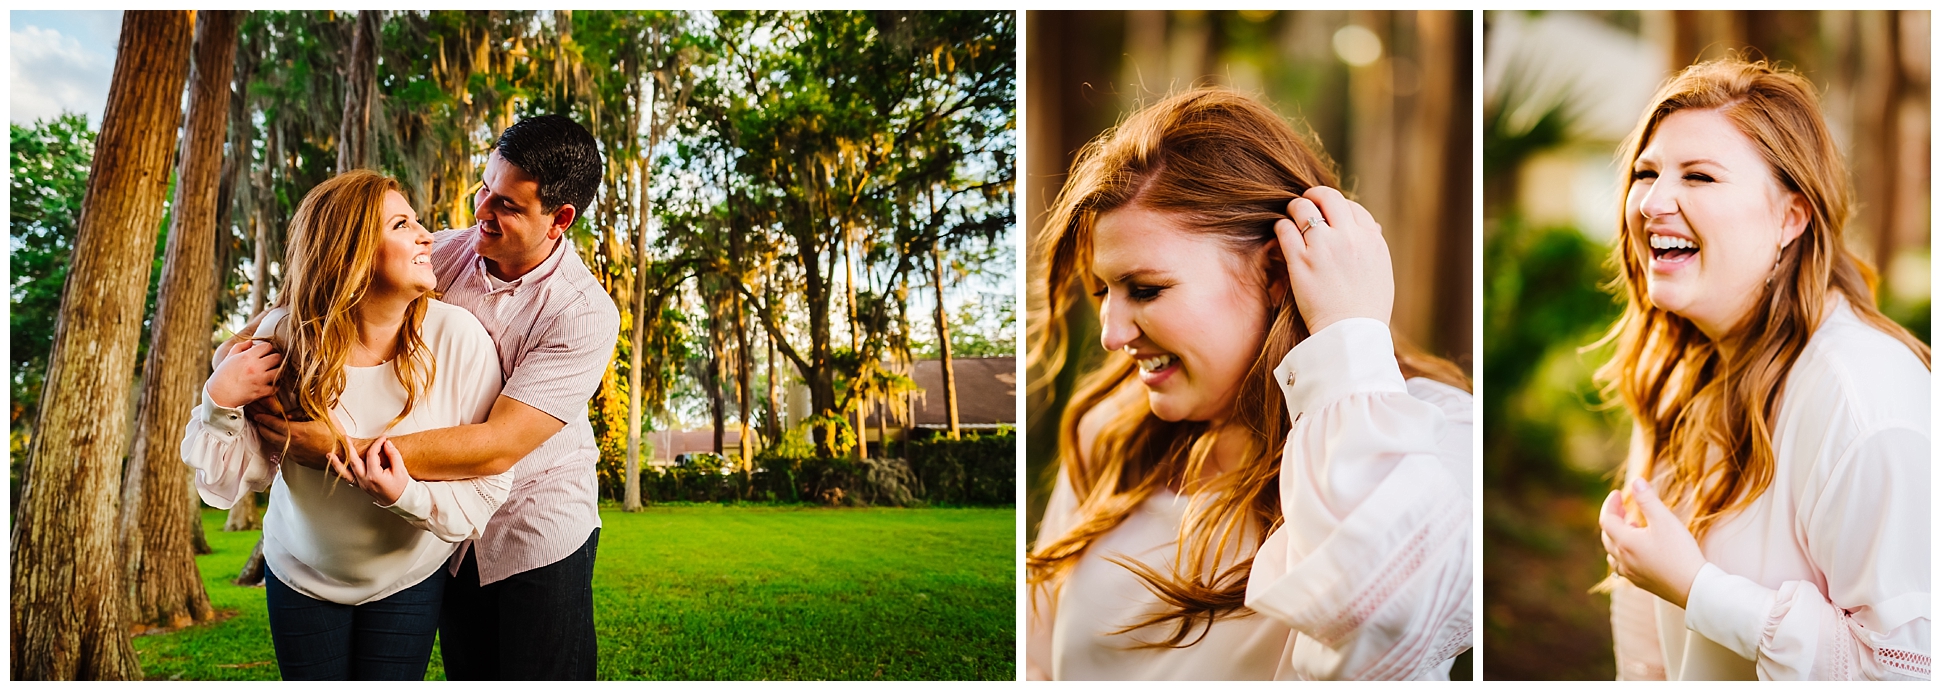 at-home-carrollwood-engagement-photos-tampa_0090.jpg